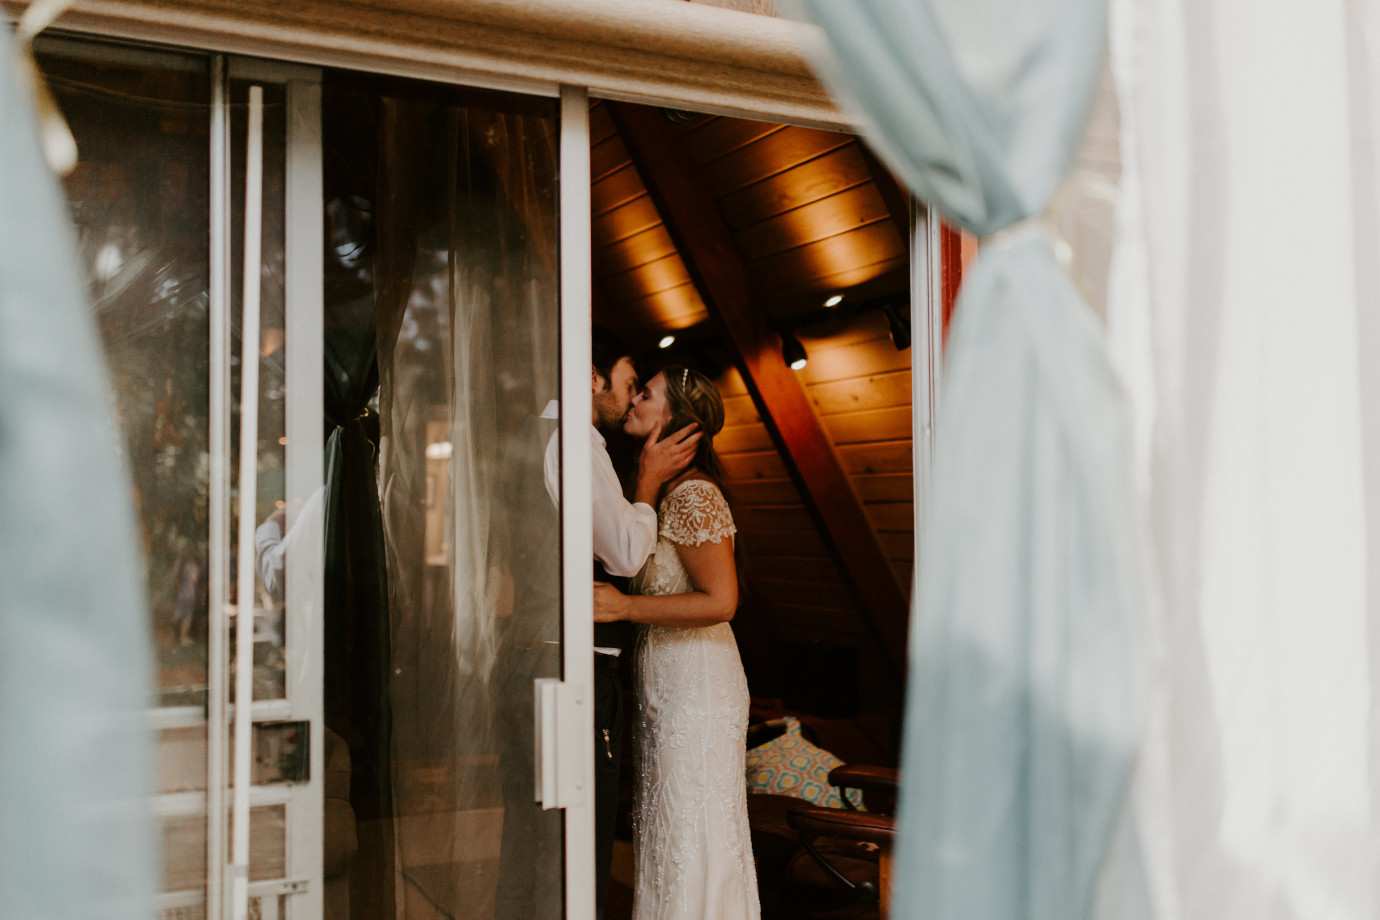 Hannah and Dan share a moment alone in Corvallis, Oregon. Intimate wedding photography in Corvallis Oregon by Sienna Plus Josh.